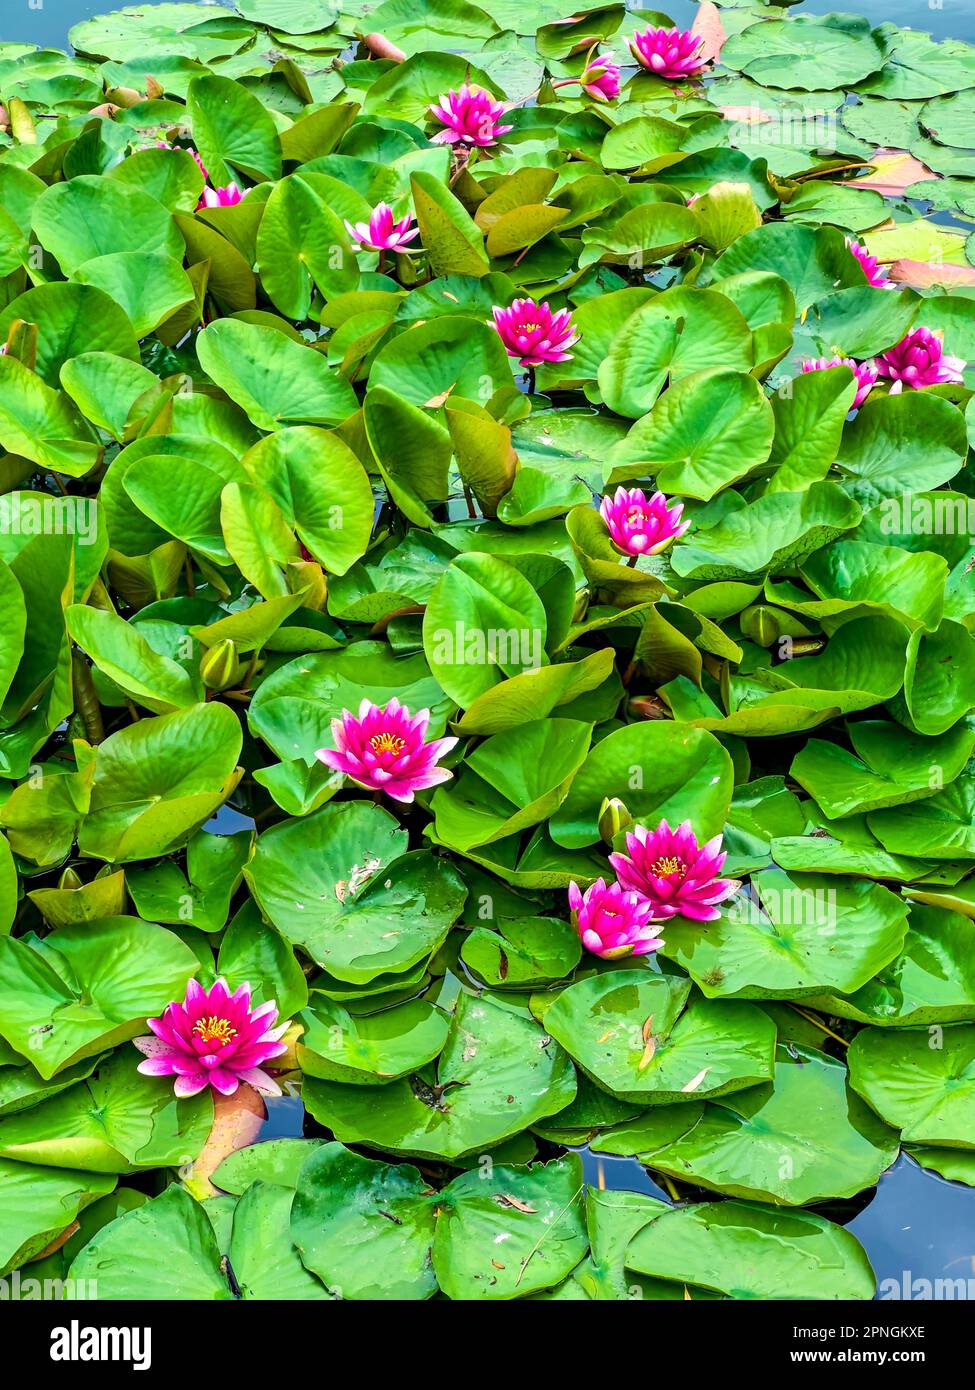 The lush green leaves and bright flowers of Nymphaea Escarboucle covering the surface of the lake Stock Photo